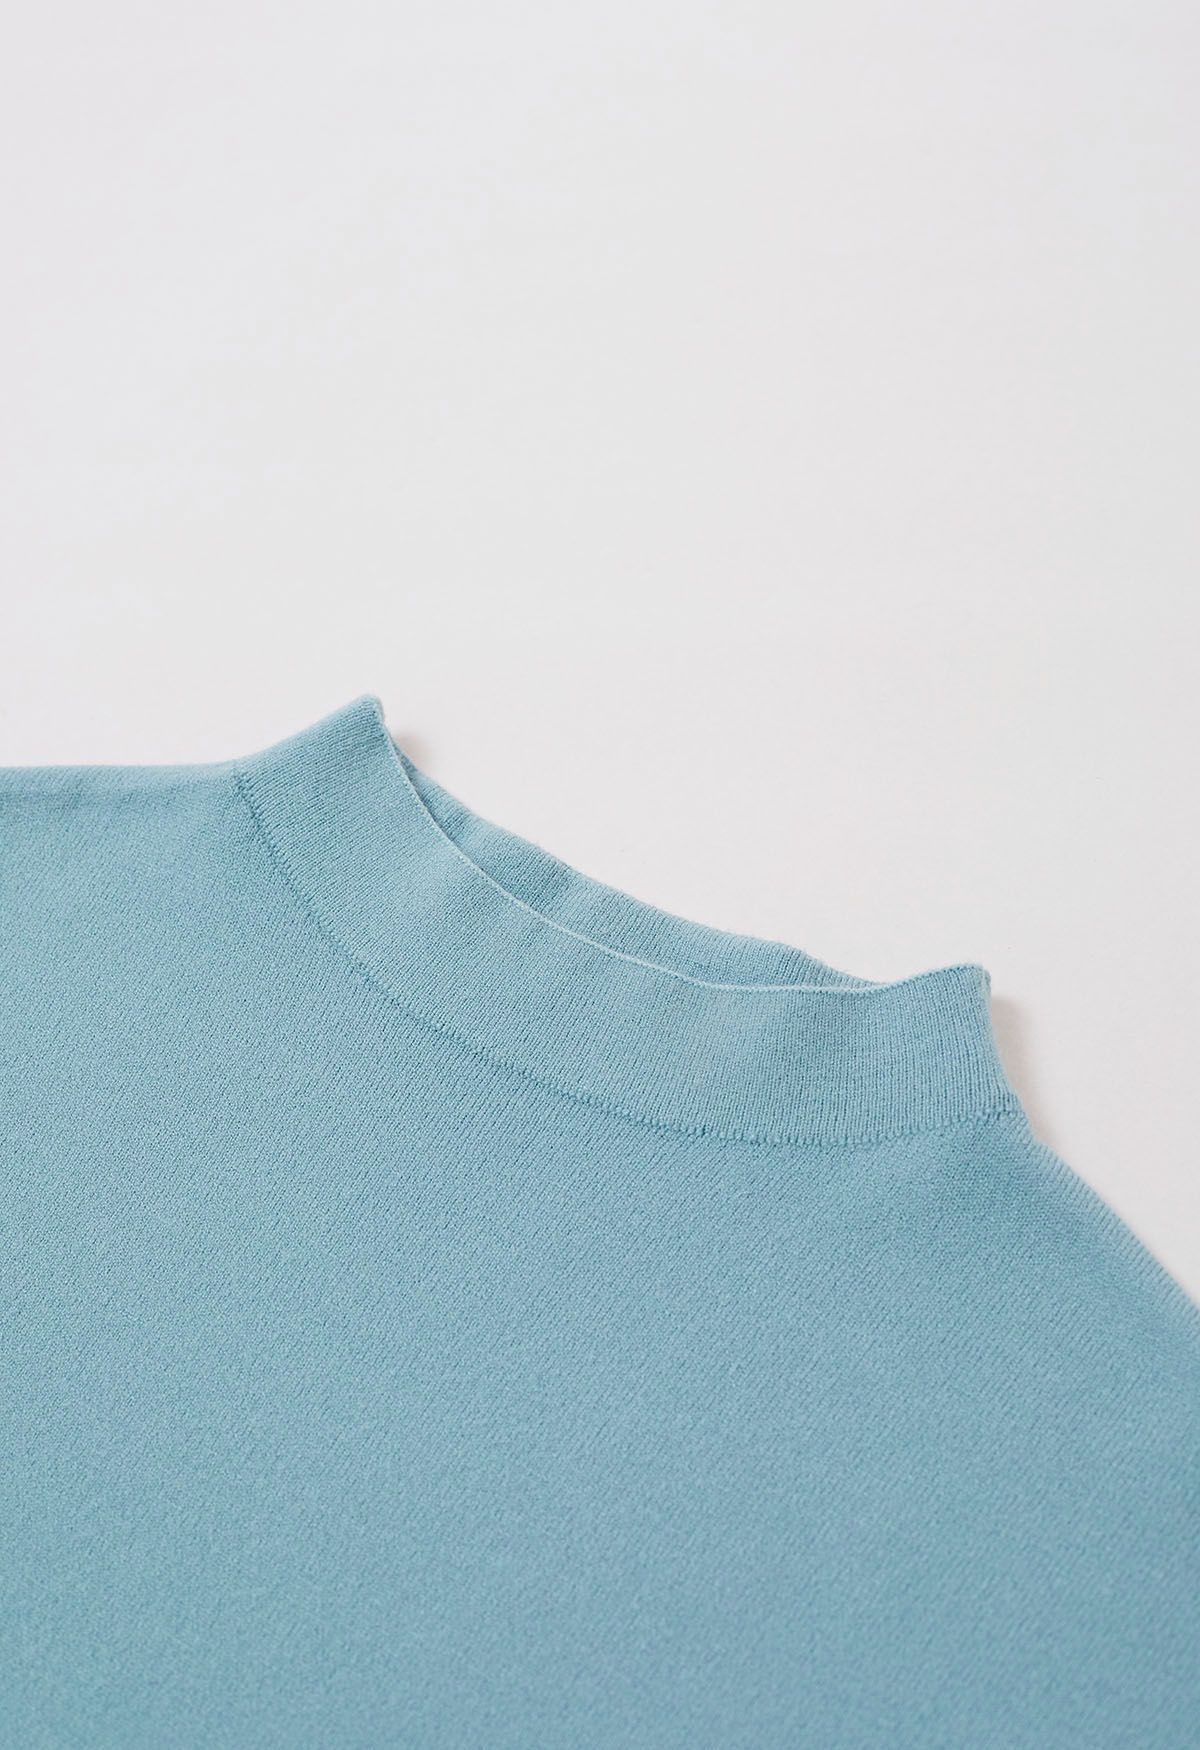 Solid Color Cap Sleeves Knit Top in Blue